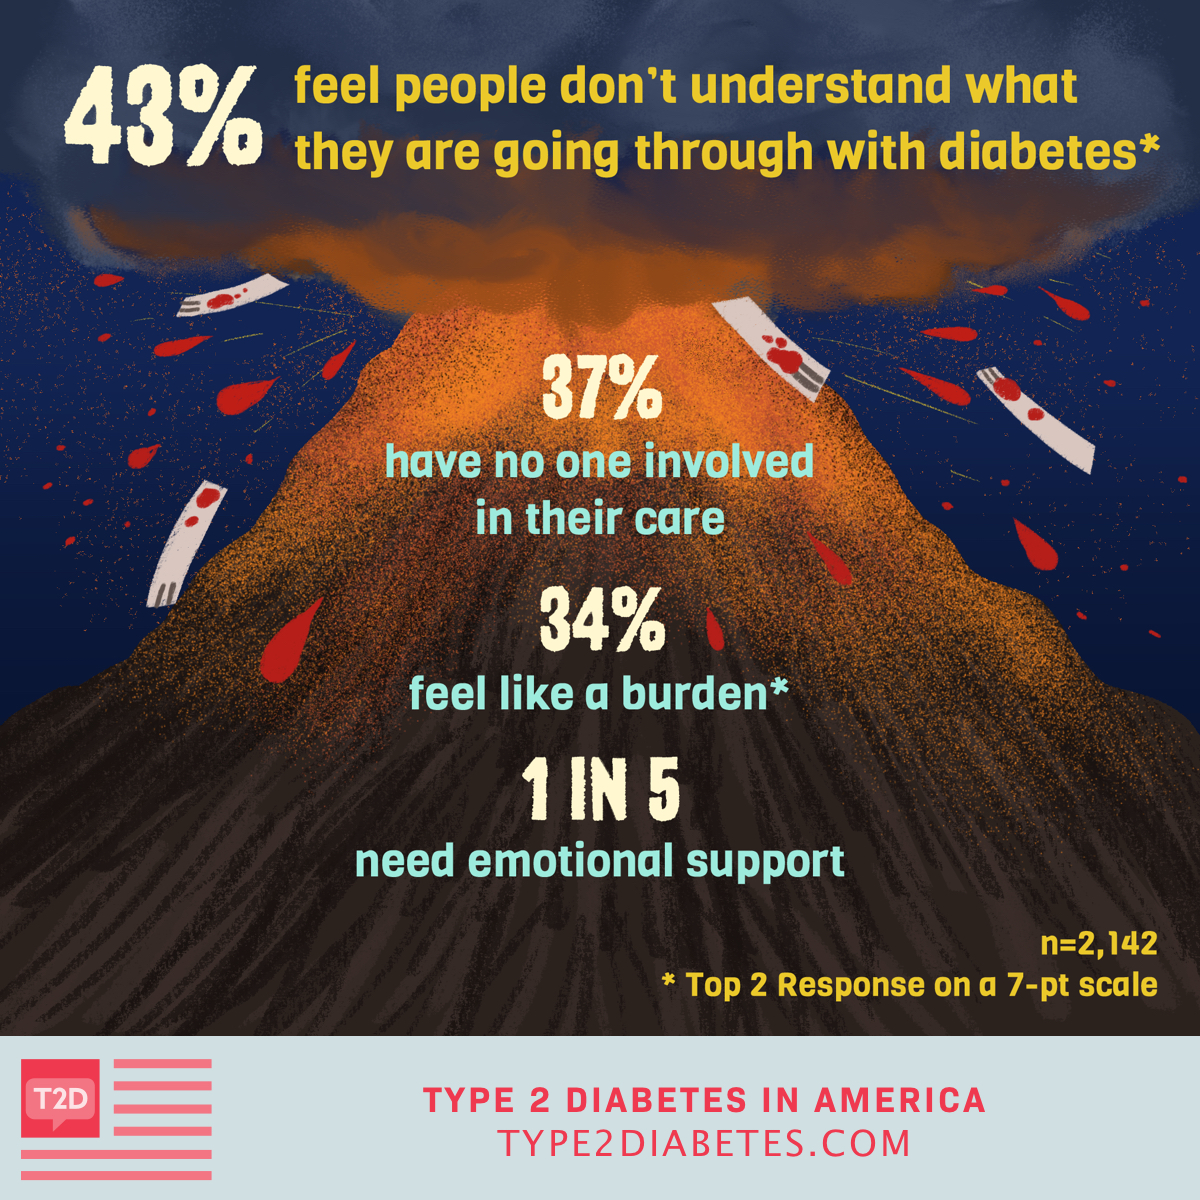 58% have experienced diabetes burnout and cope with it by binge eating, praying, exercising or ignoring it.